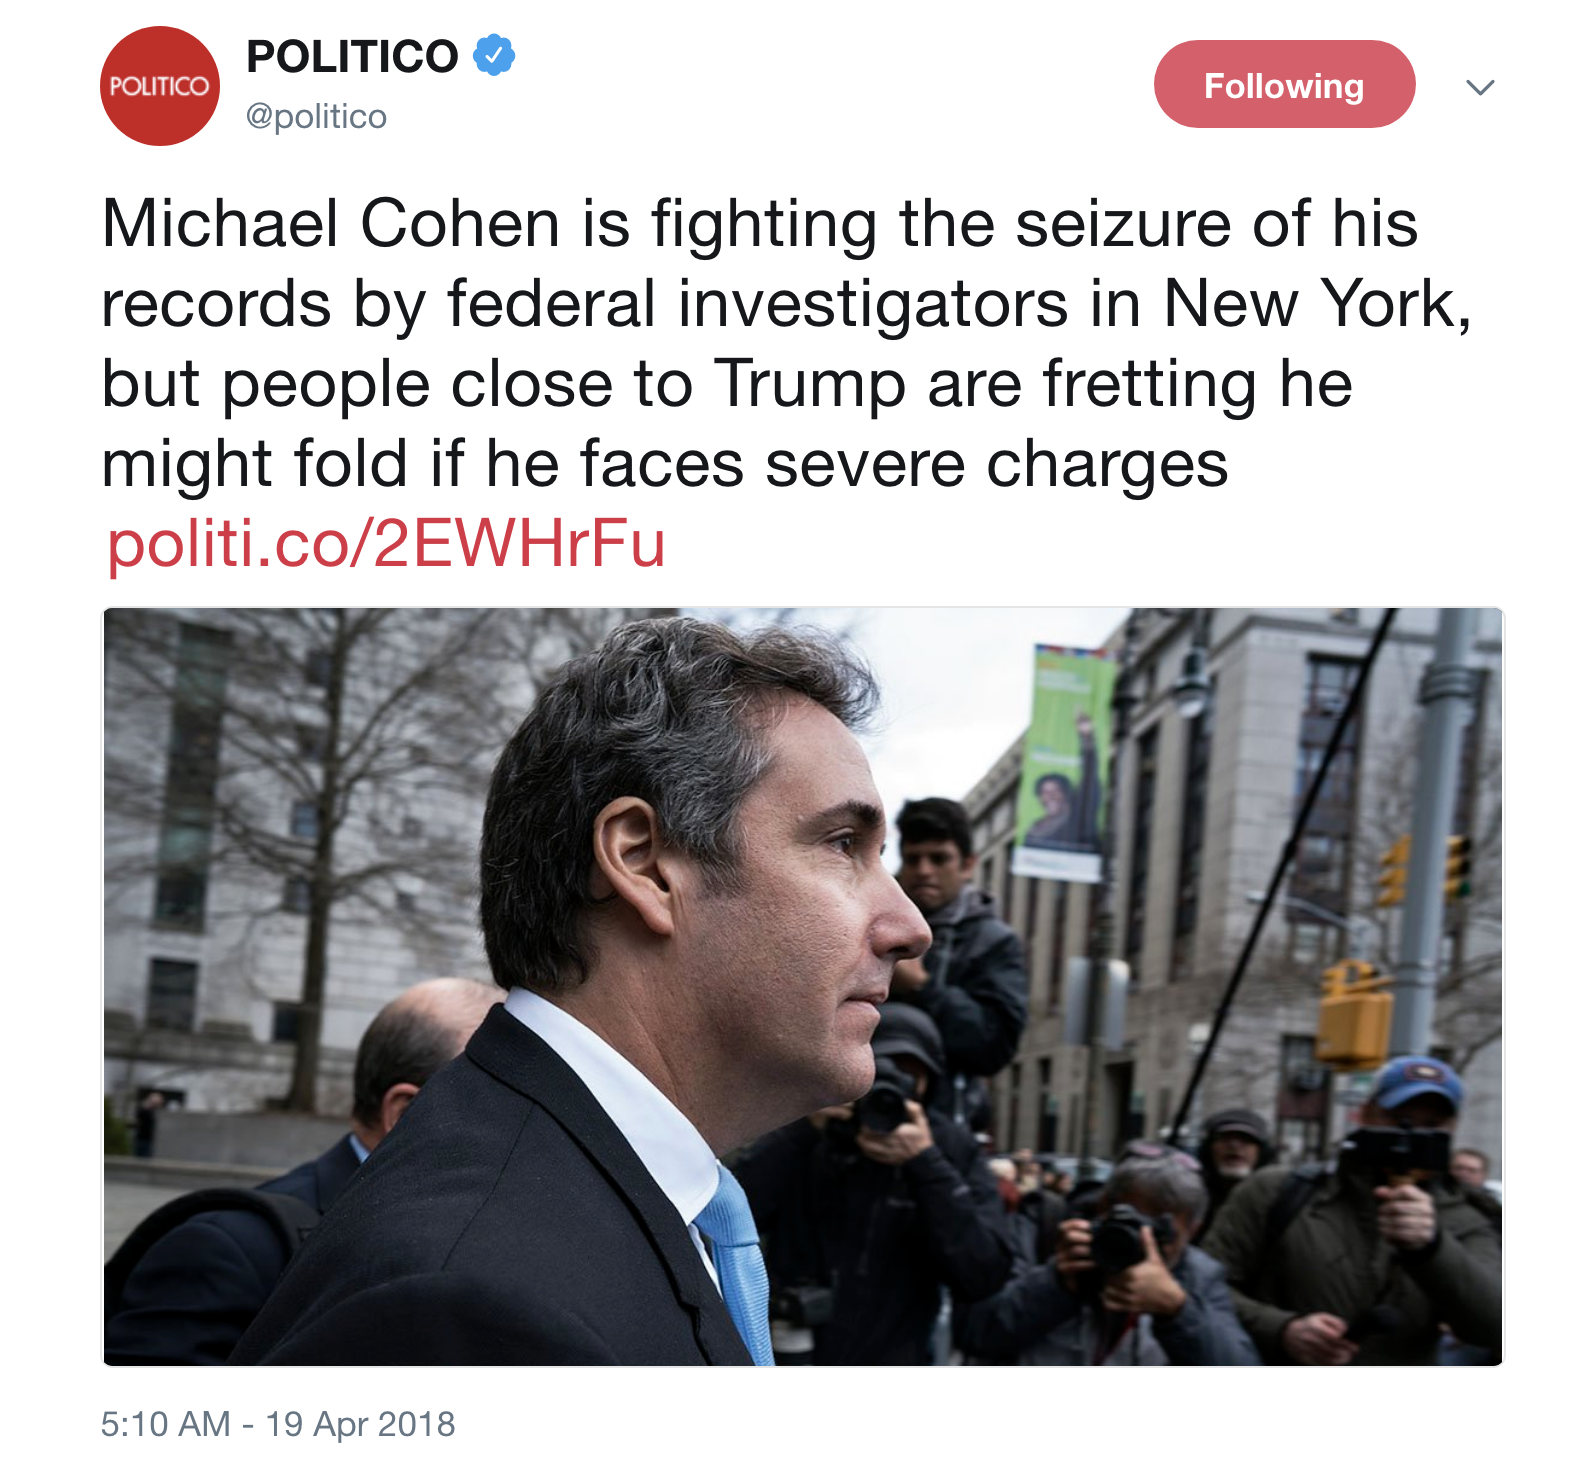 Screen-Shot-2018-04-19-at-8.14.14-AM Trump's Attorney Abruptly Drops Multiple Lawsuits After FBI Raid Like A Scared Crook Corruption Crime Donald Trump Politics Top Stories 